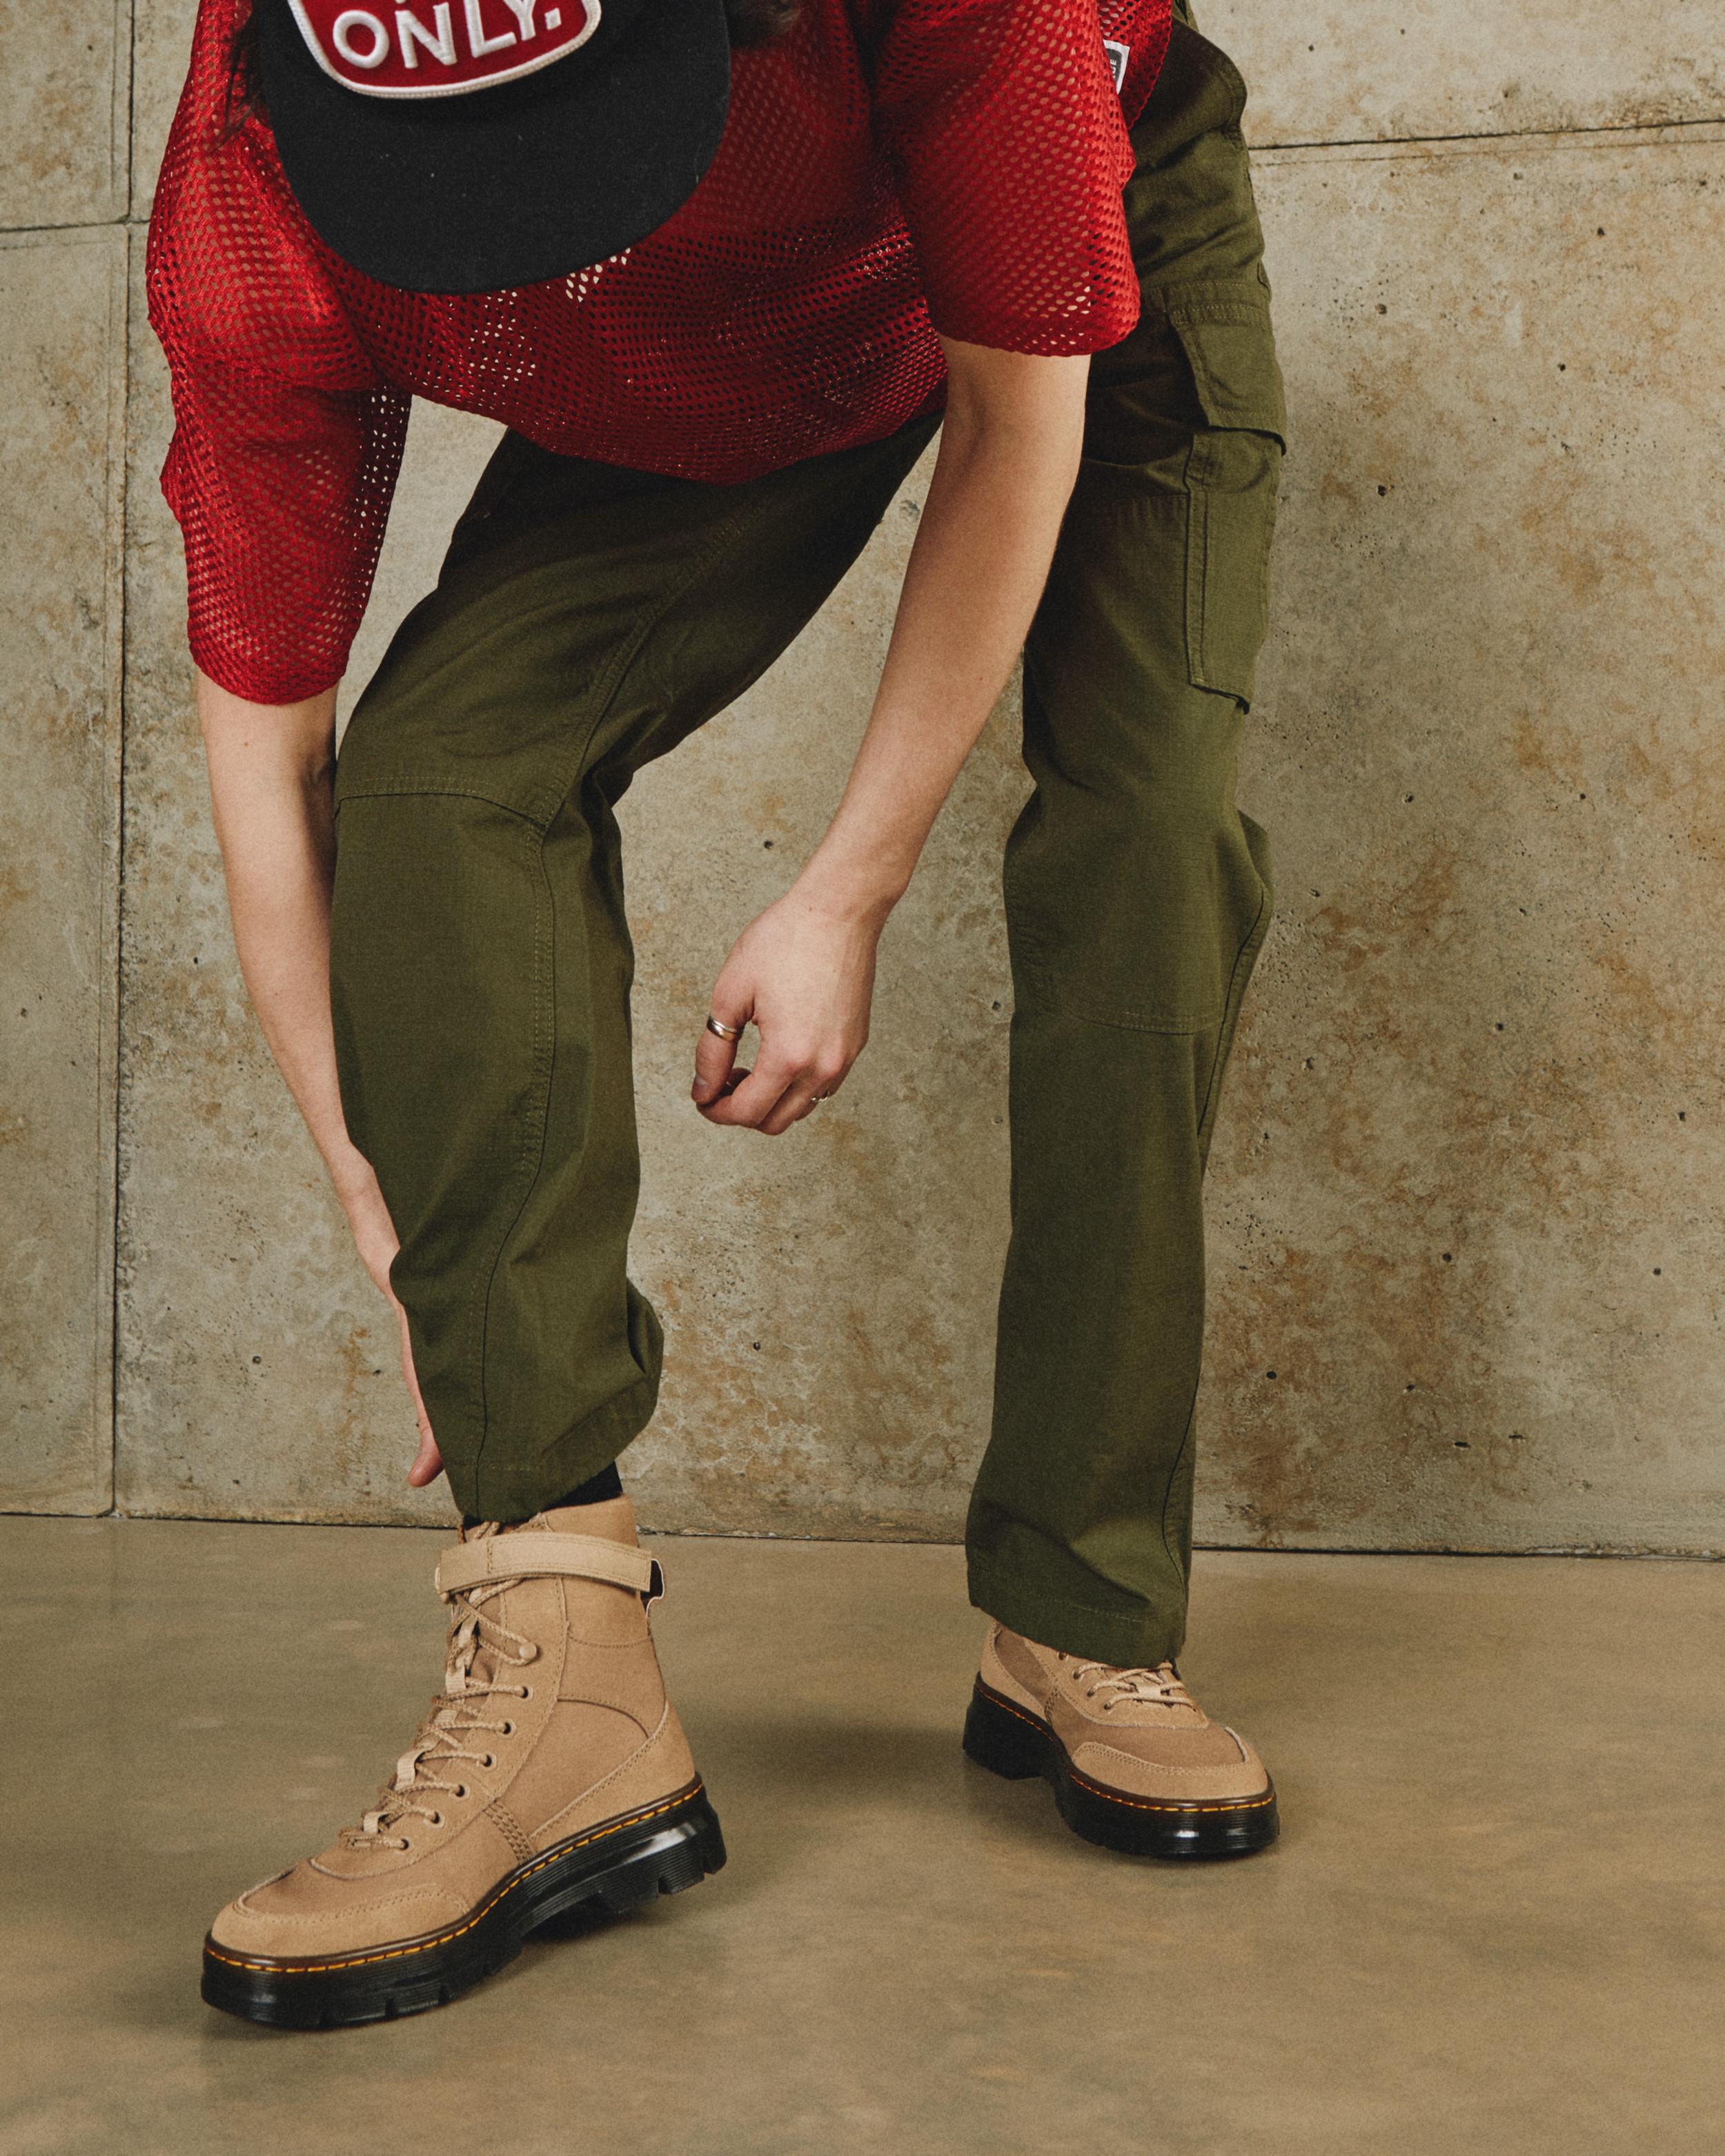 Combs Tech Canvas & Suede Utility Boots in Savannah Tan